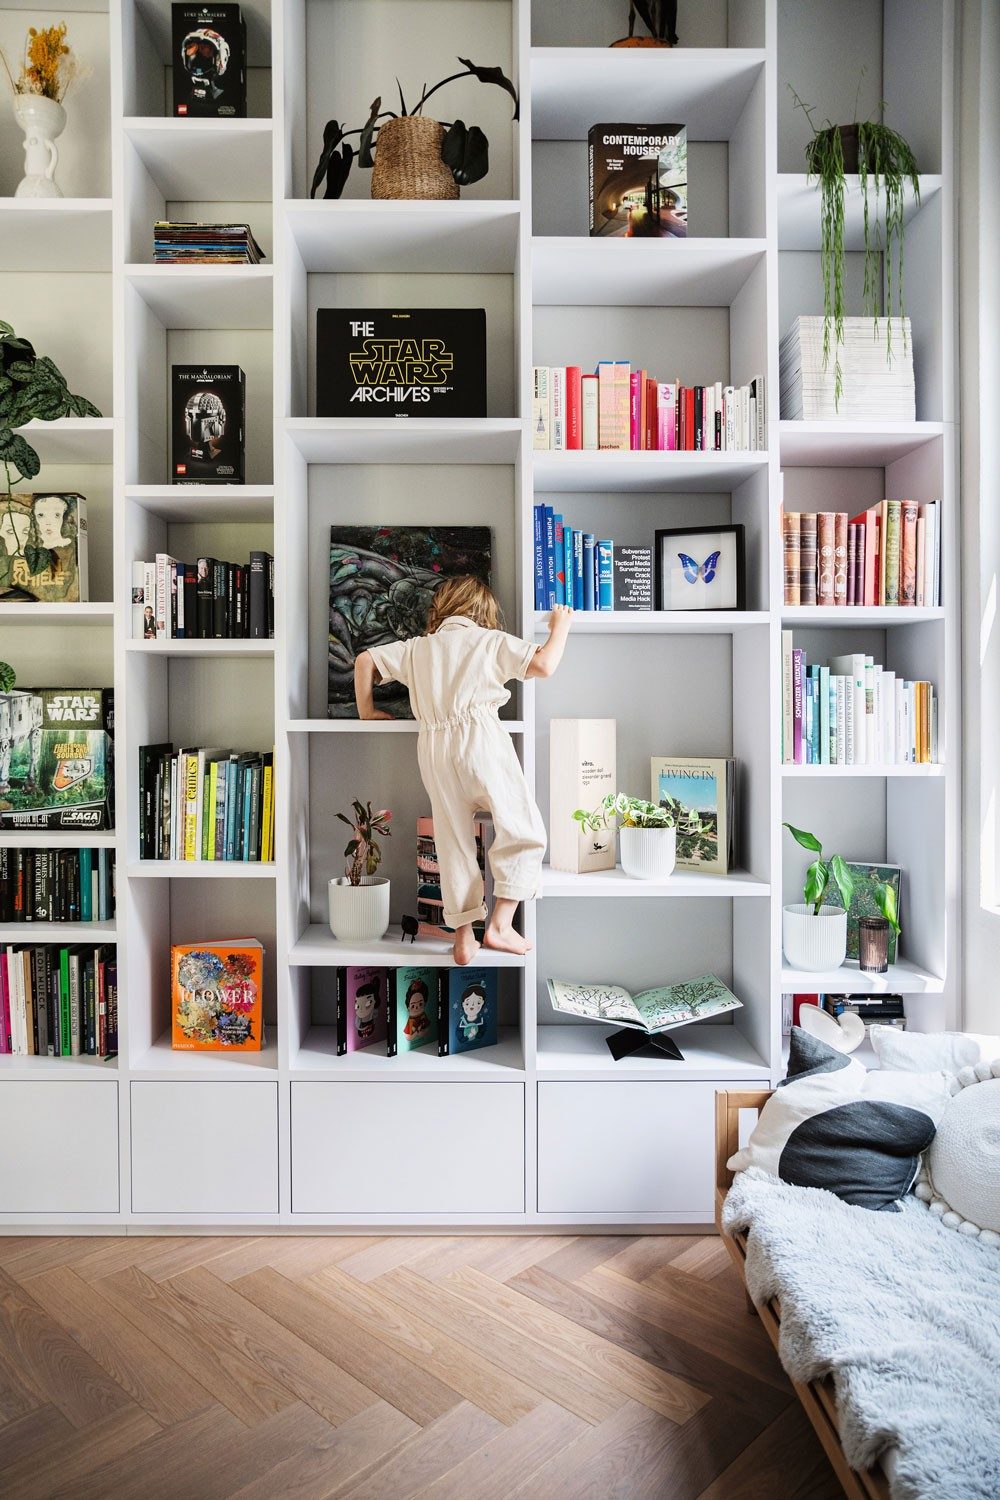 A child in a playsuit climbs up bookshelves. The library houses stylishly arranged books and Star Wars merchandise.